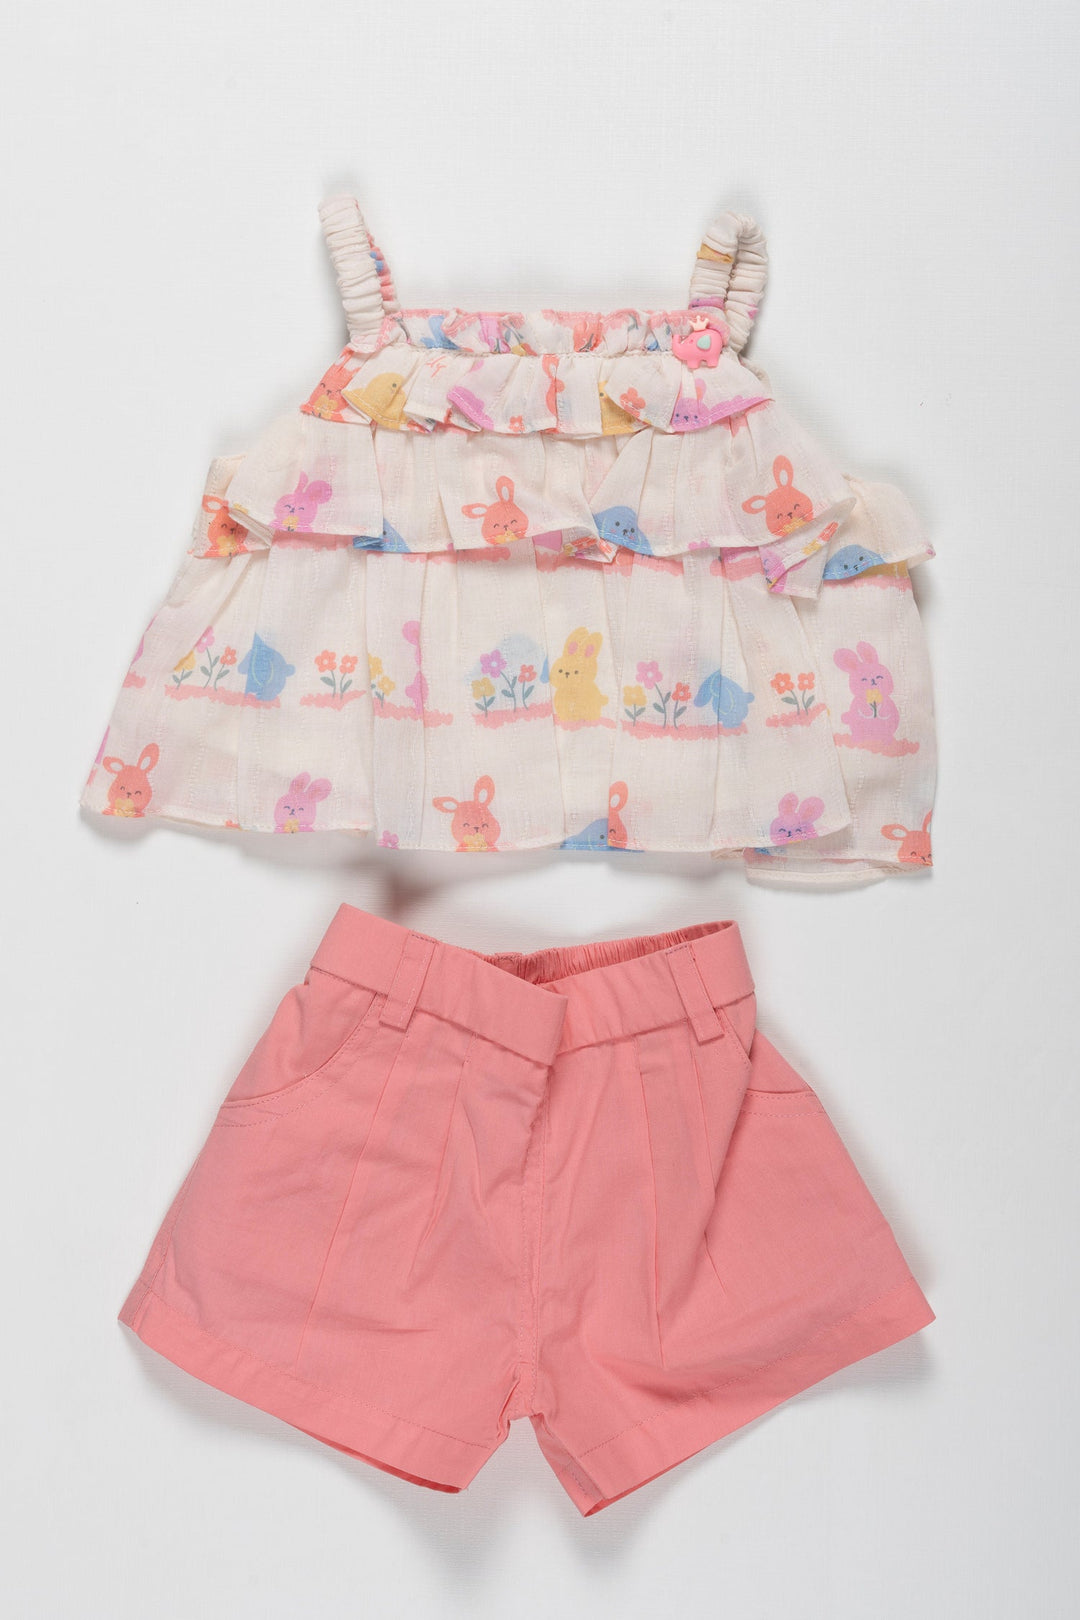 The Nesavu Baby Casual Sets Whimsical Garden Party Girls Top and Shorts Set - Adorable Summer Ensemble Nesavu 14 (6M) / Half white / Cotton BFJ536A-14 Cute Bunny-Print Ruffle Top and Pink Shorts Set for Girls | The Nesavu